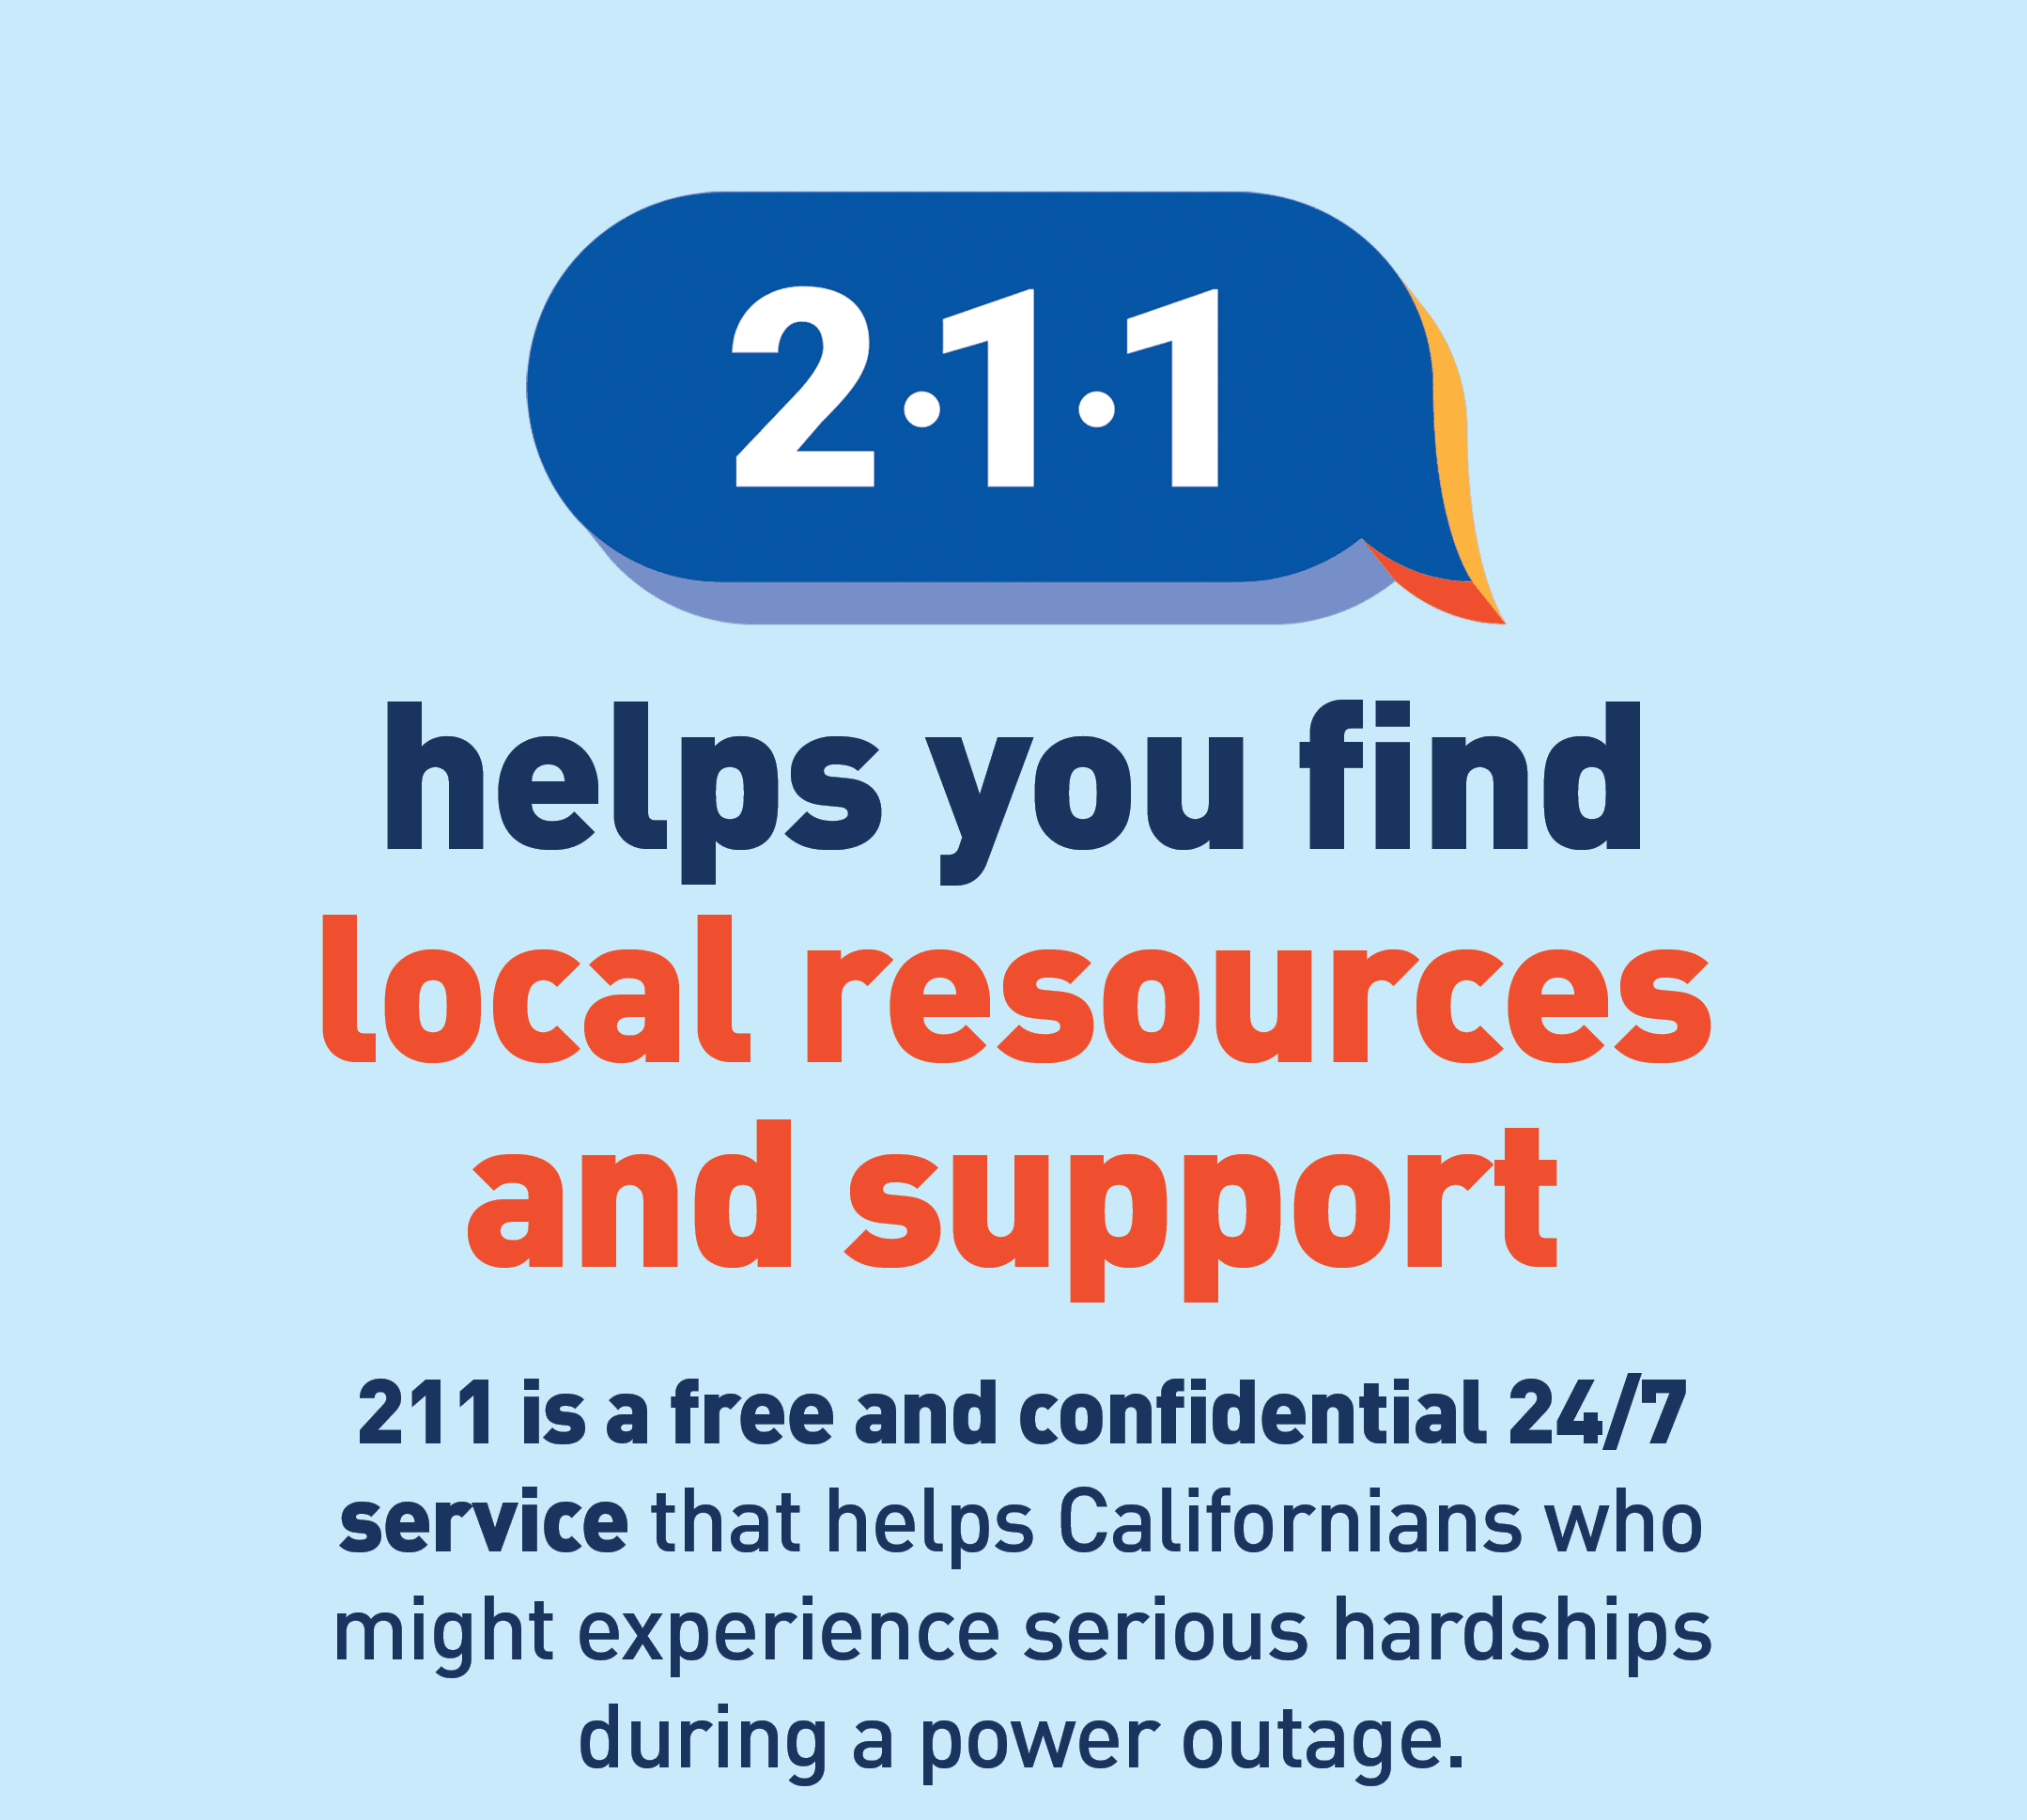 Text: 211 helps you find local resources and support 211 is a free and confidential 24/7 service that helps Californians who might experience serious hardships during a power outage.